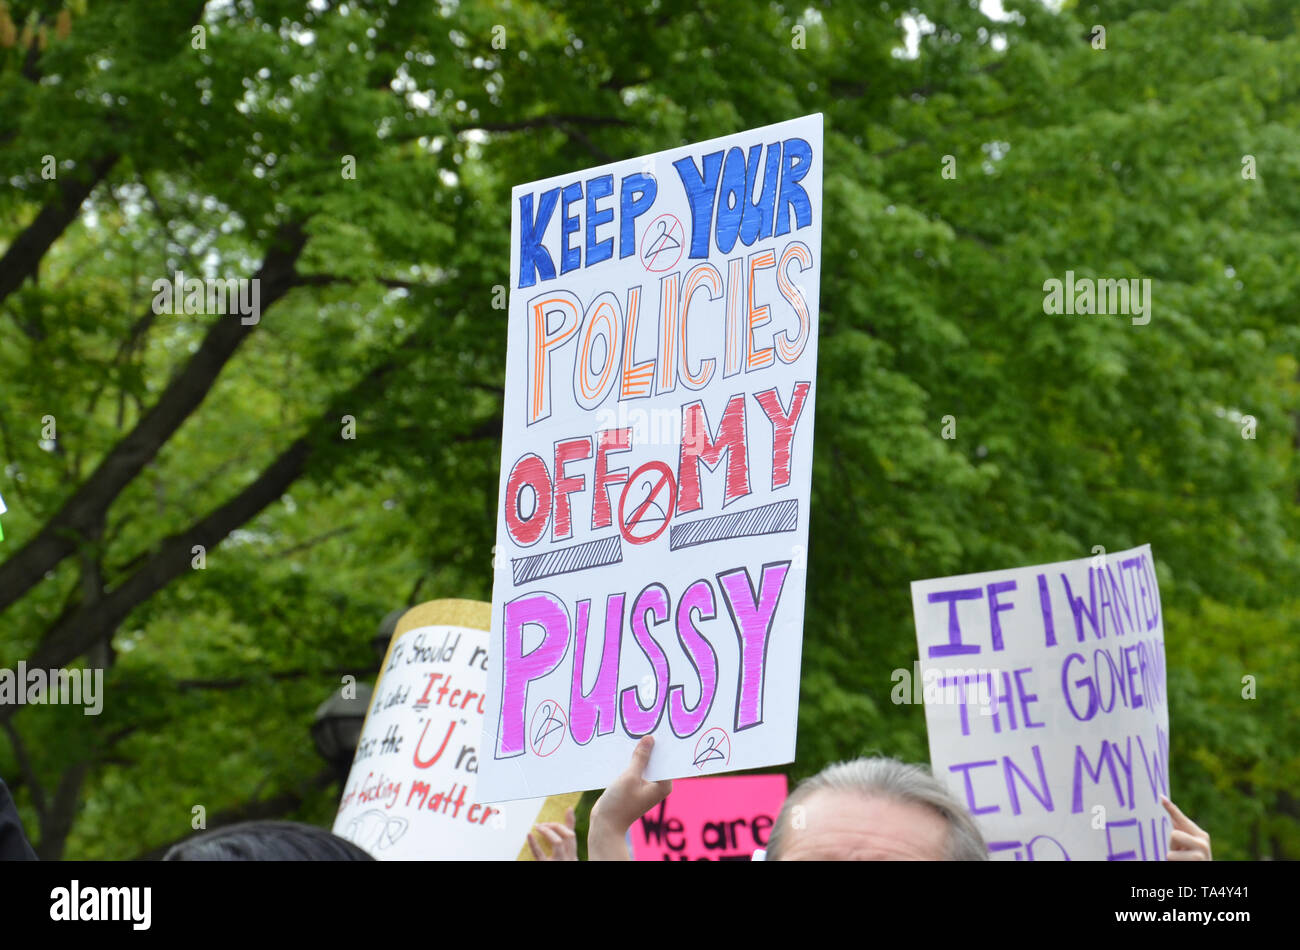 ANN ARBOR, MI/USA - MAY 21, 2019: A protest sign at the Ann Arbor Stop the Bans protest organized by Planned Parenthood. Stock Photo